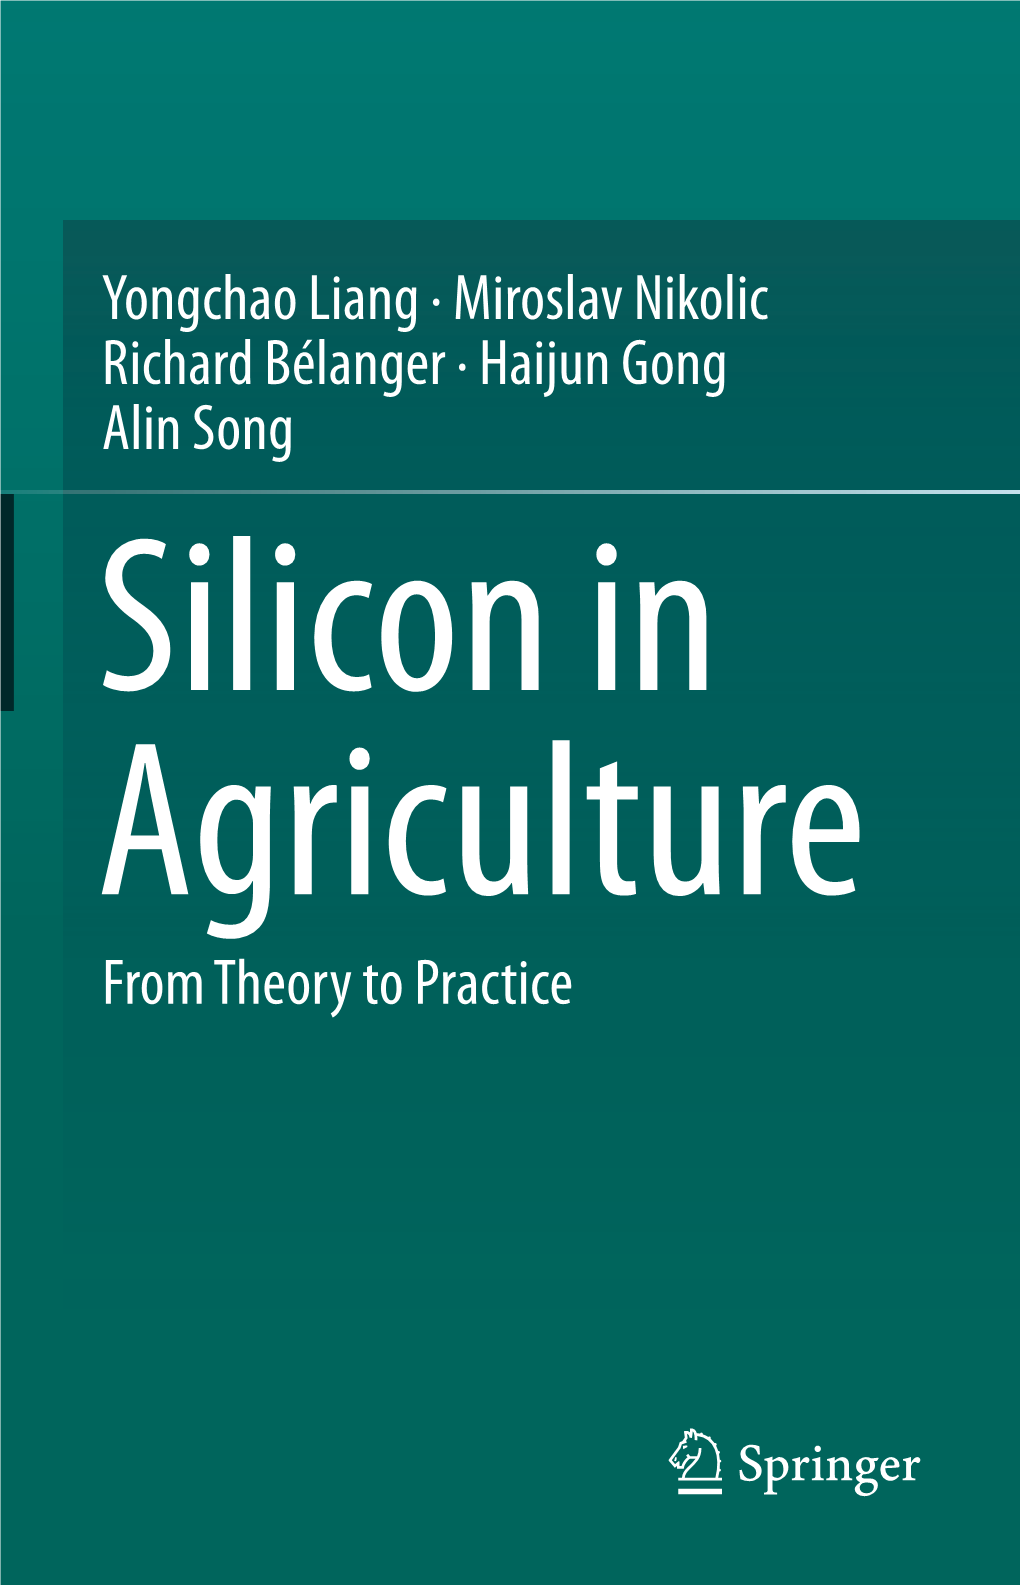 Silicon in Agriculture: from Theory to Practice